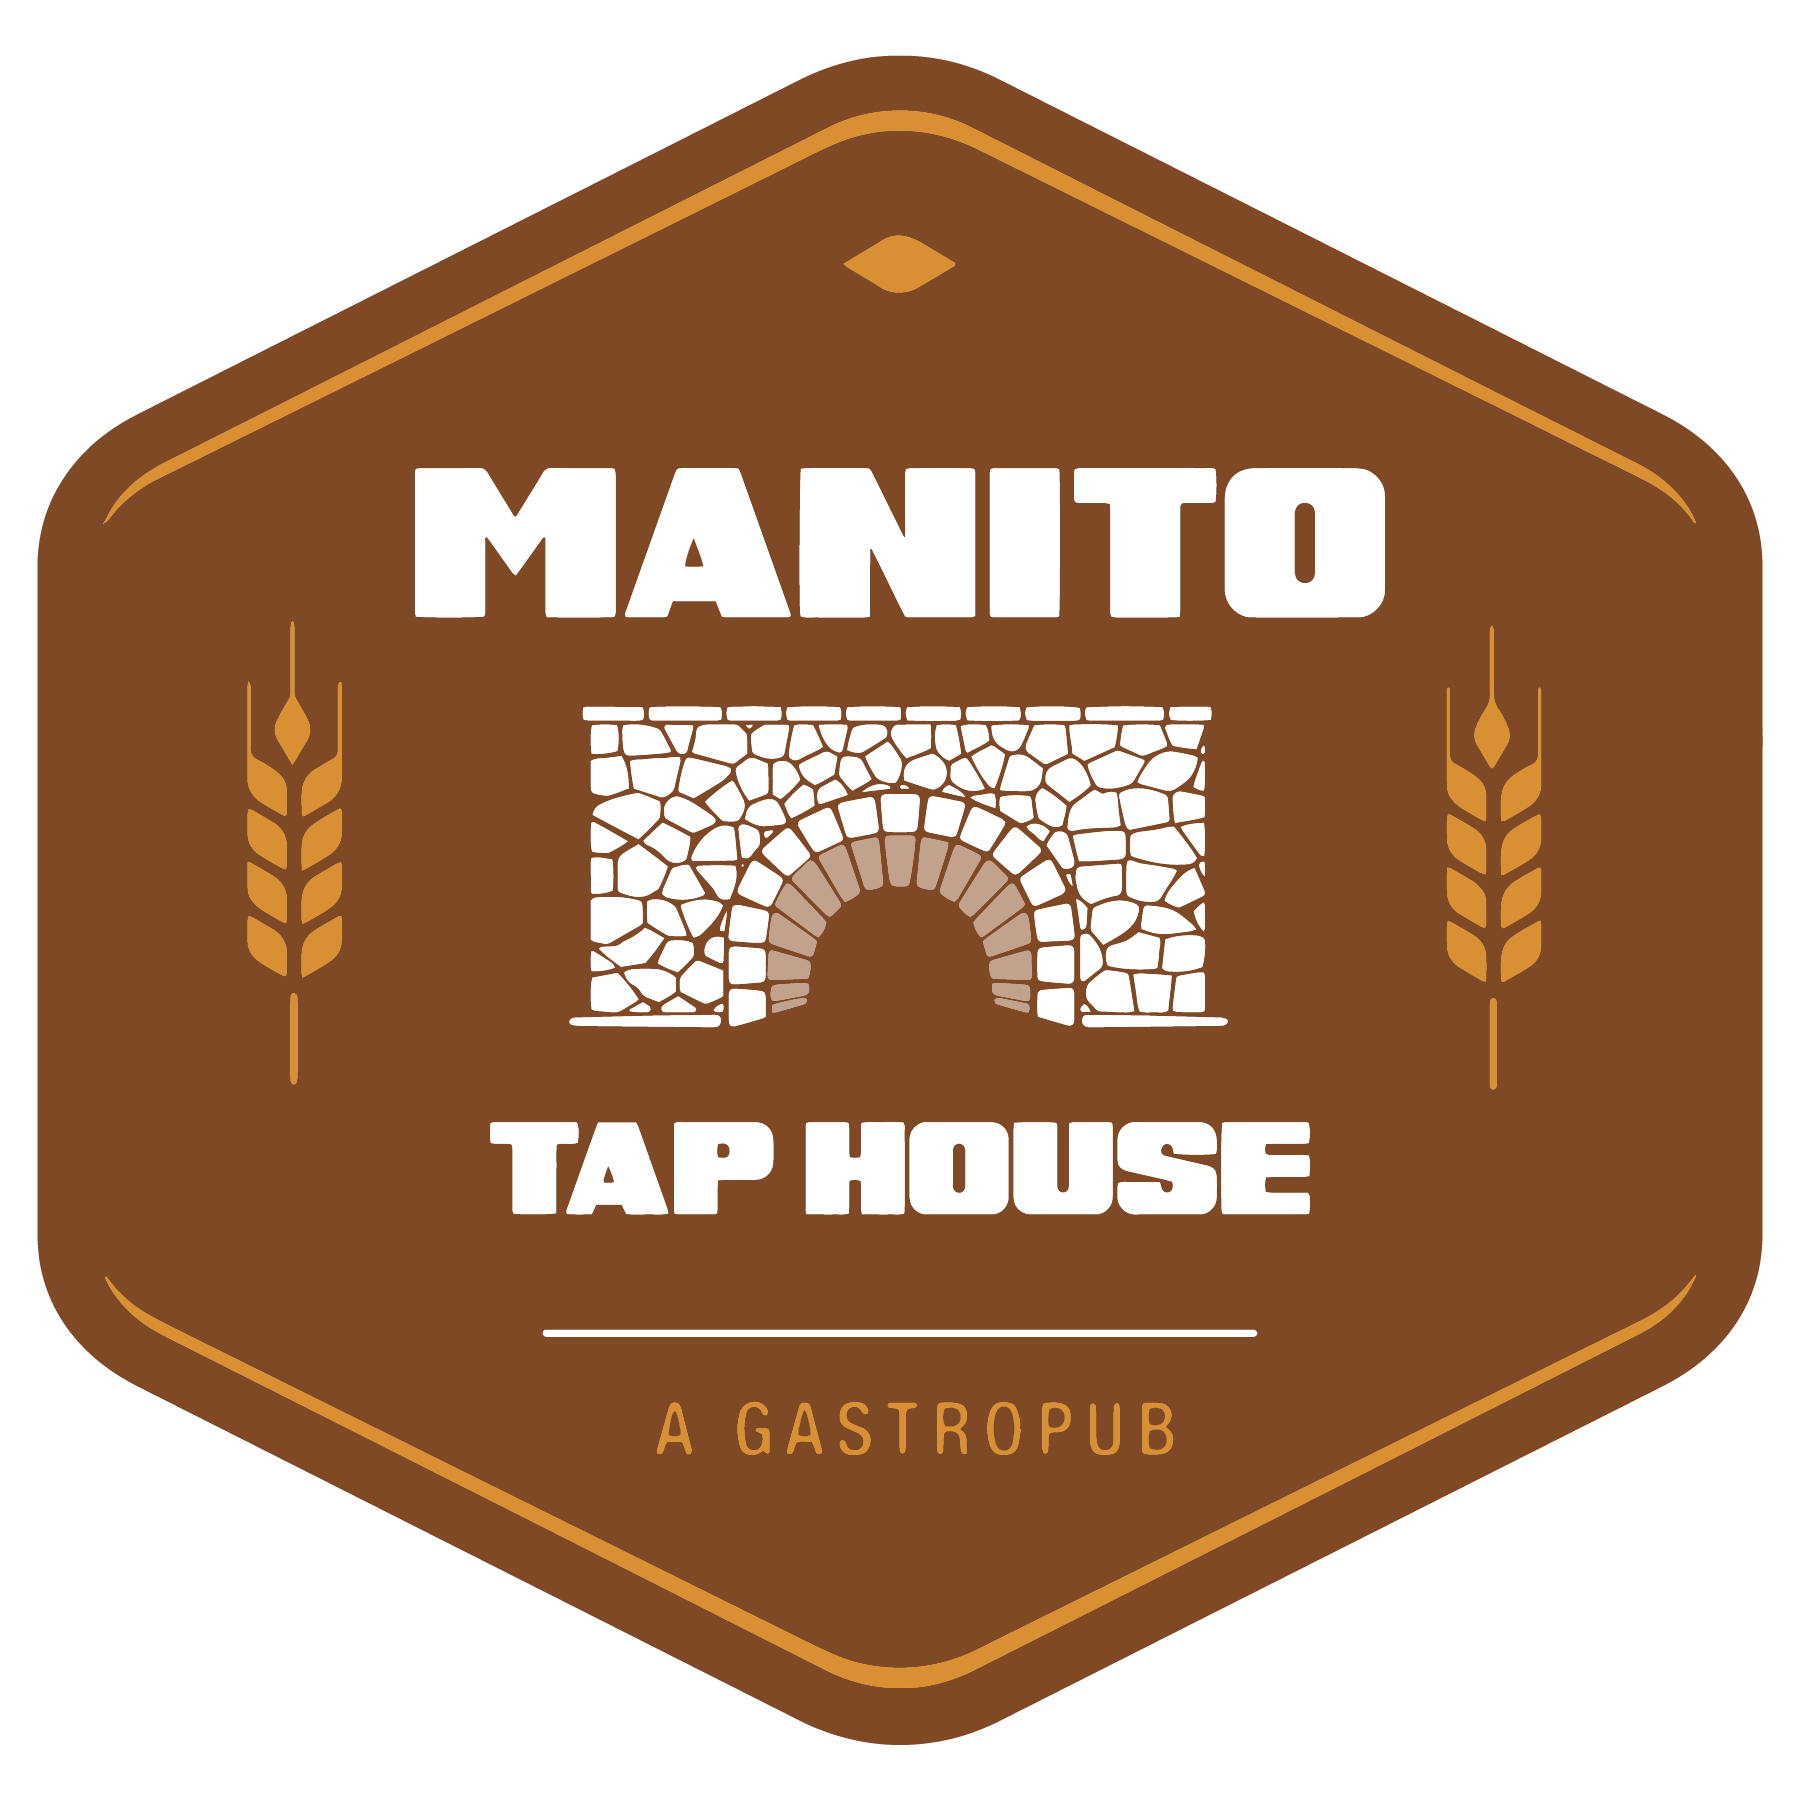 Manito Tap House